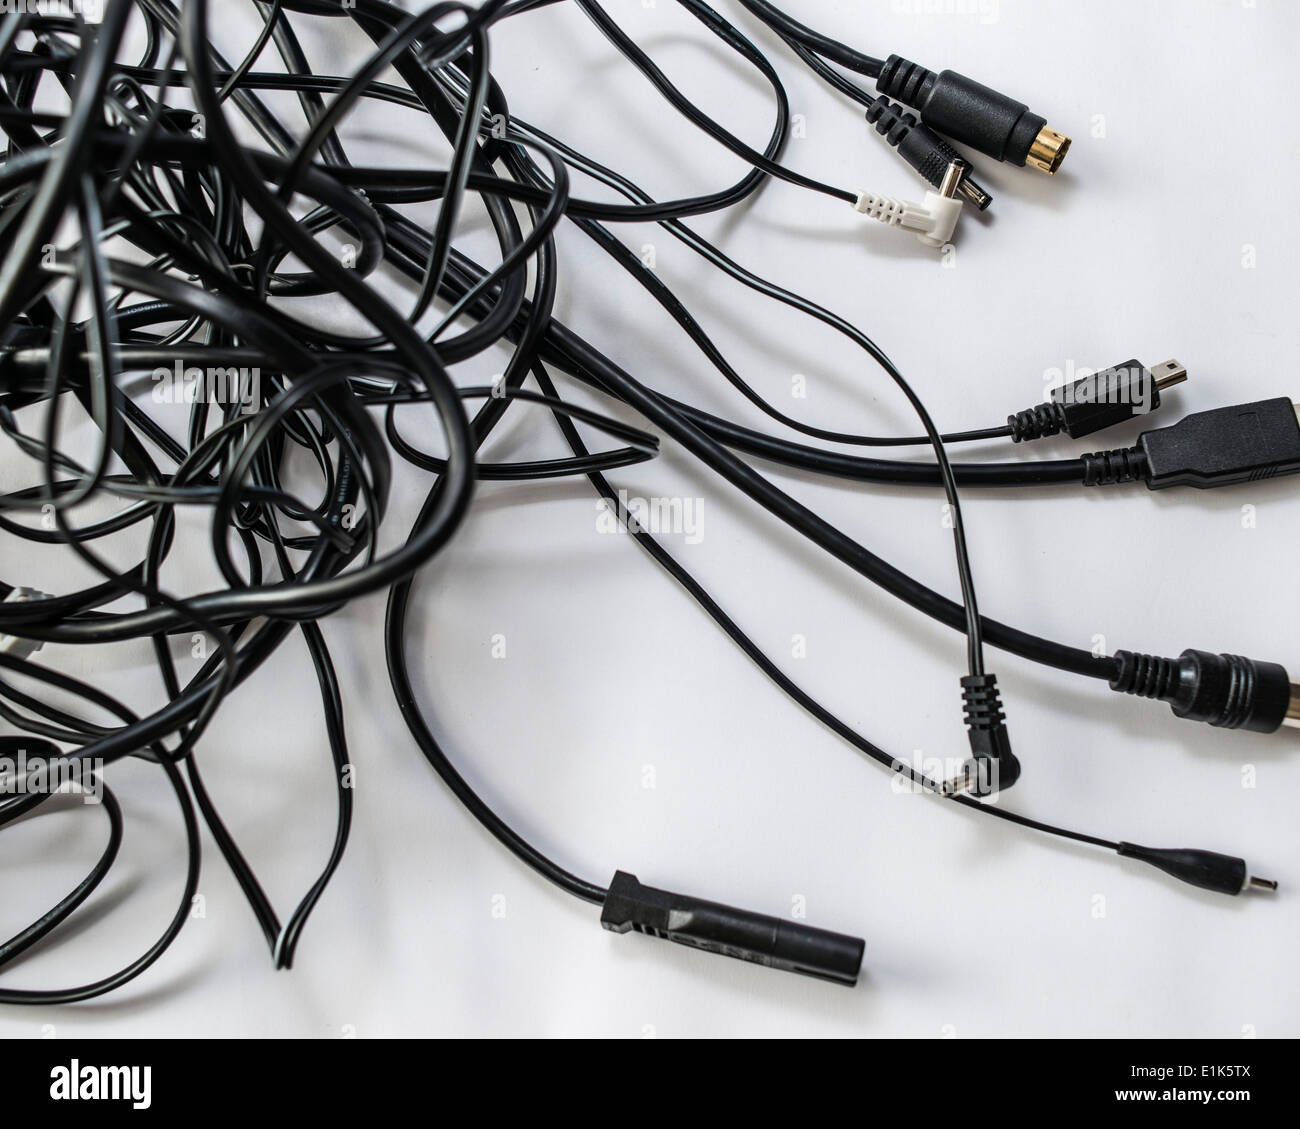 Tangle of leads with different connectors Stock Photo